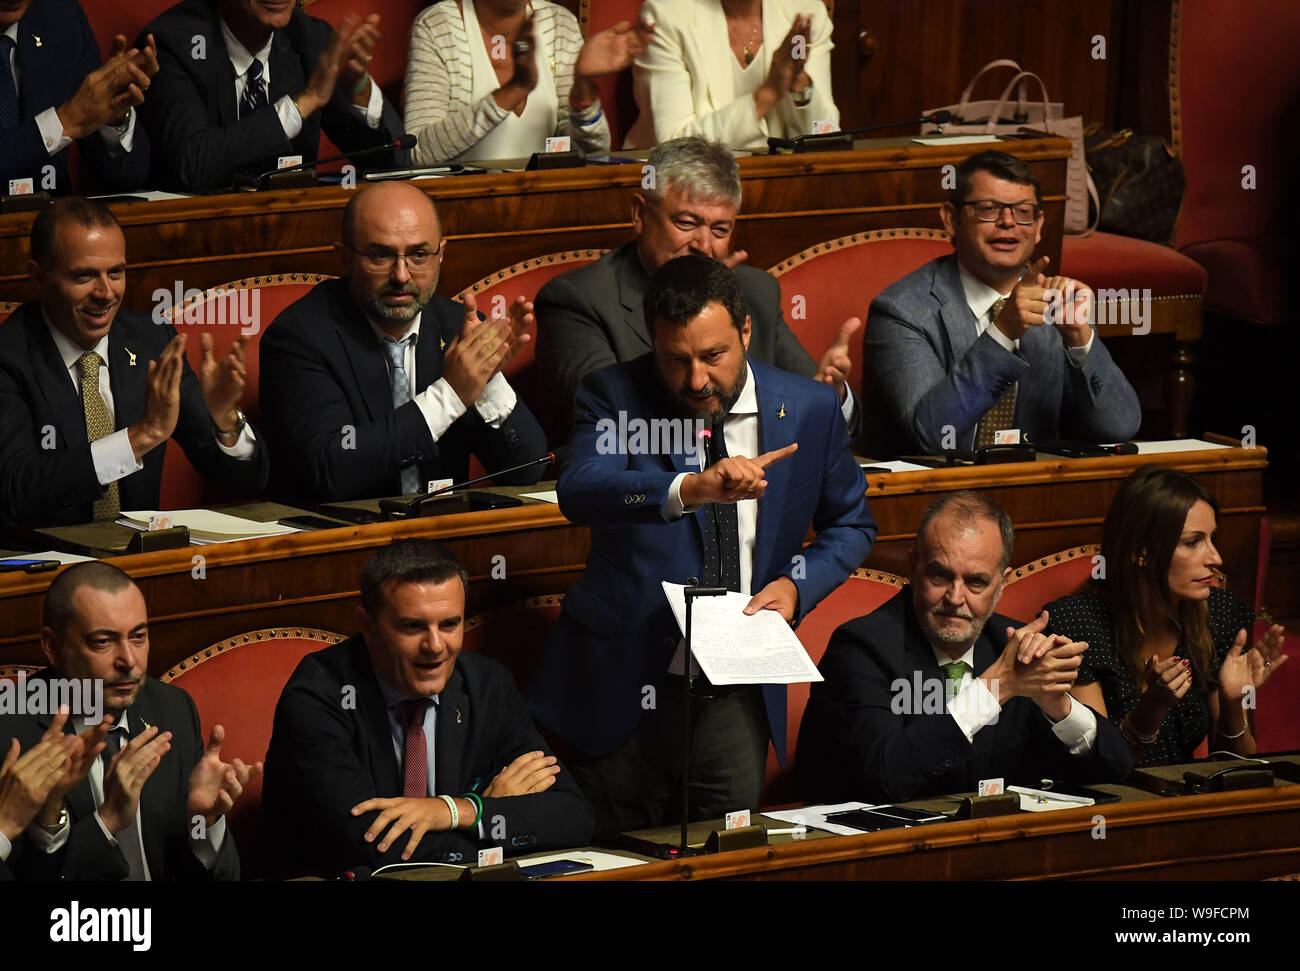 (190813) -- ROME, Aug. 13, 2019 (Xinhua) -- Italian Interior Minister Matteo Salvini speaks to the Senate in Rome, Italy, on Aug. 13, 2019. Italian Interior Minister Matteo Salvini, leader of the rightwing, anti-immigrant League party, told the Senate on Tuesday that he is willing to vote on a reform that would reduce the number of members of parliament as long as this is followed by an immediate snap election. This appears to postpone an impending government crisis, which Salvini unleashed last week when he announced his party had filed a no-confidence motion against Prime Minister Giuseppe C Stock Photo